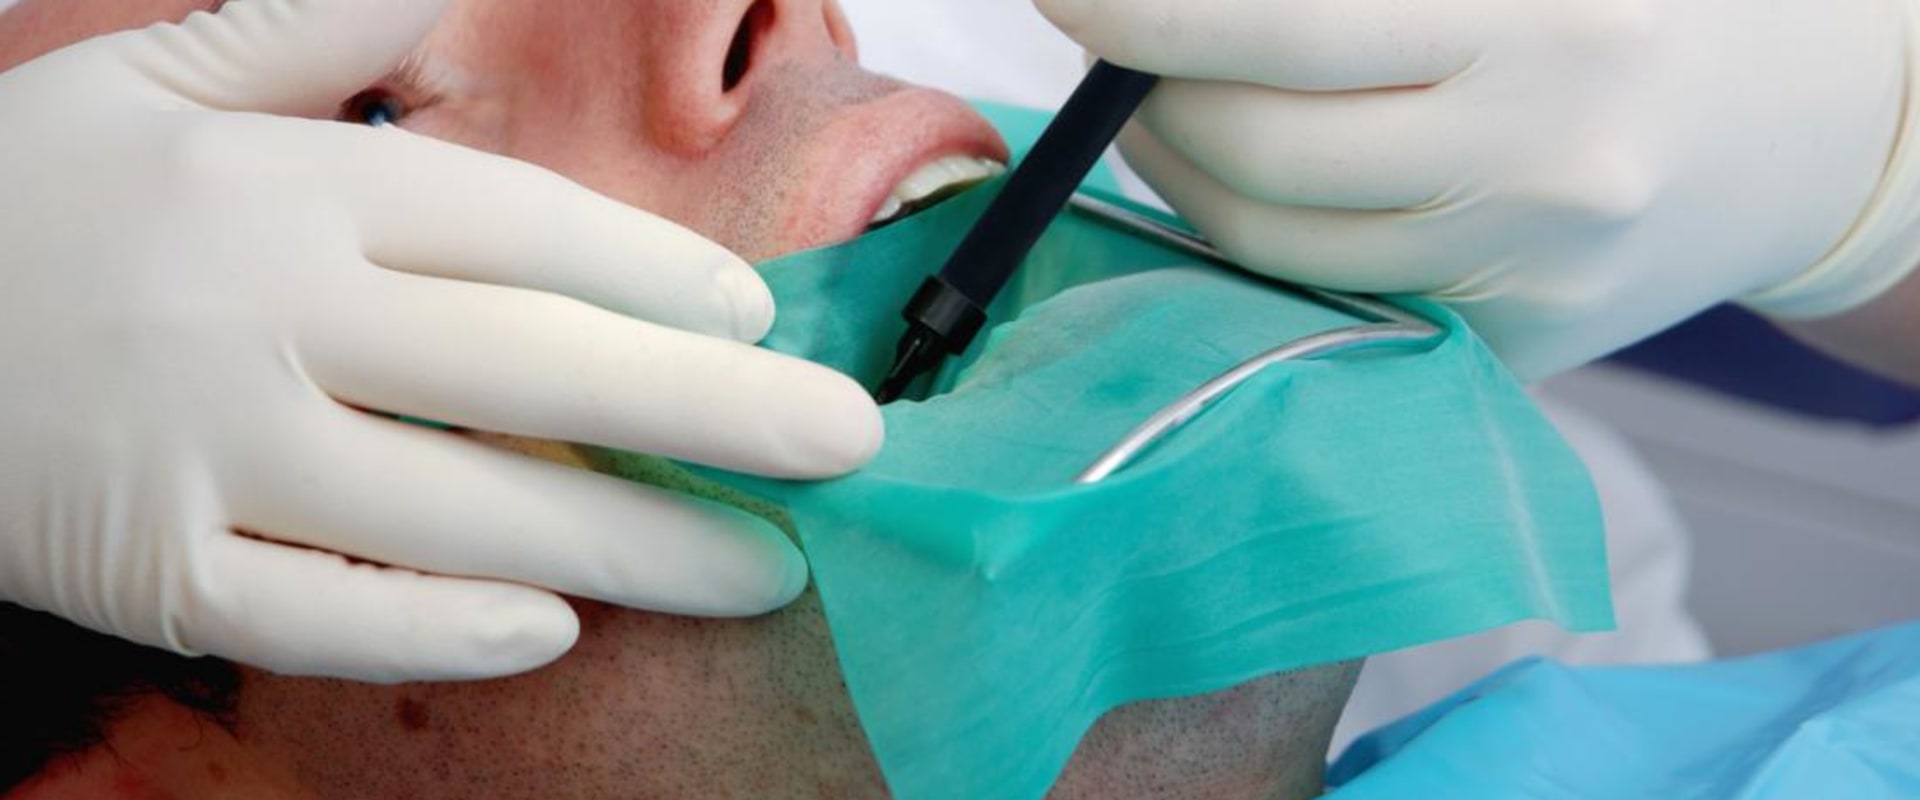 What procedures does an endodontist usually perform?